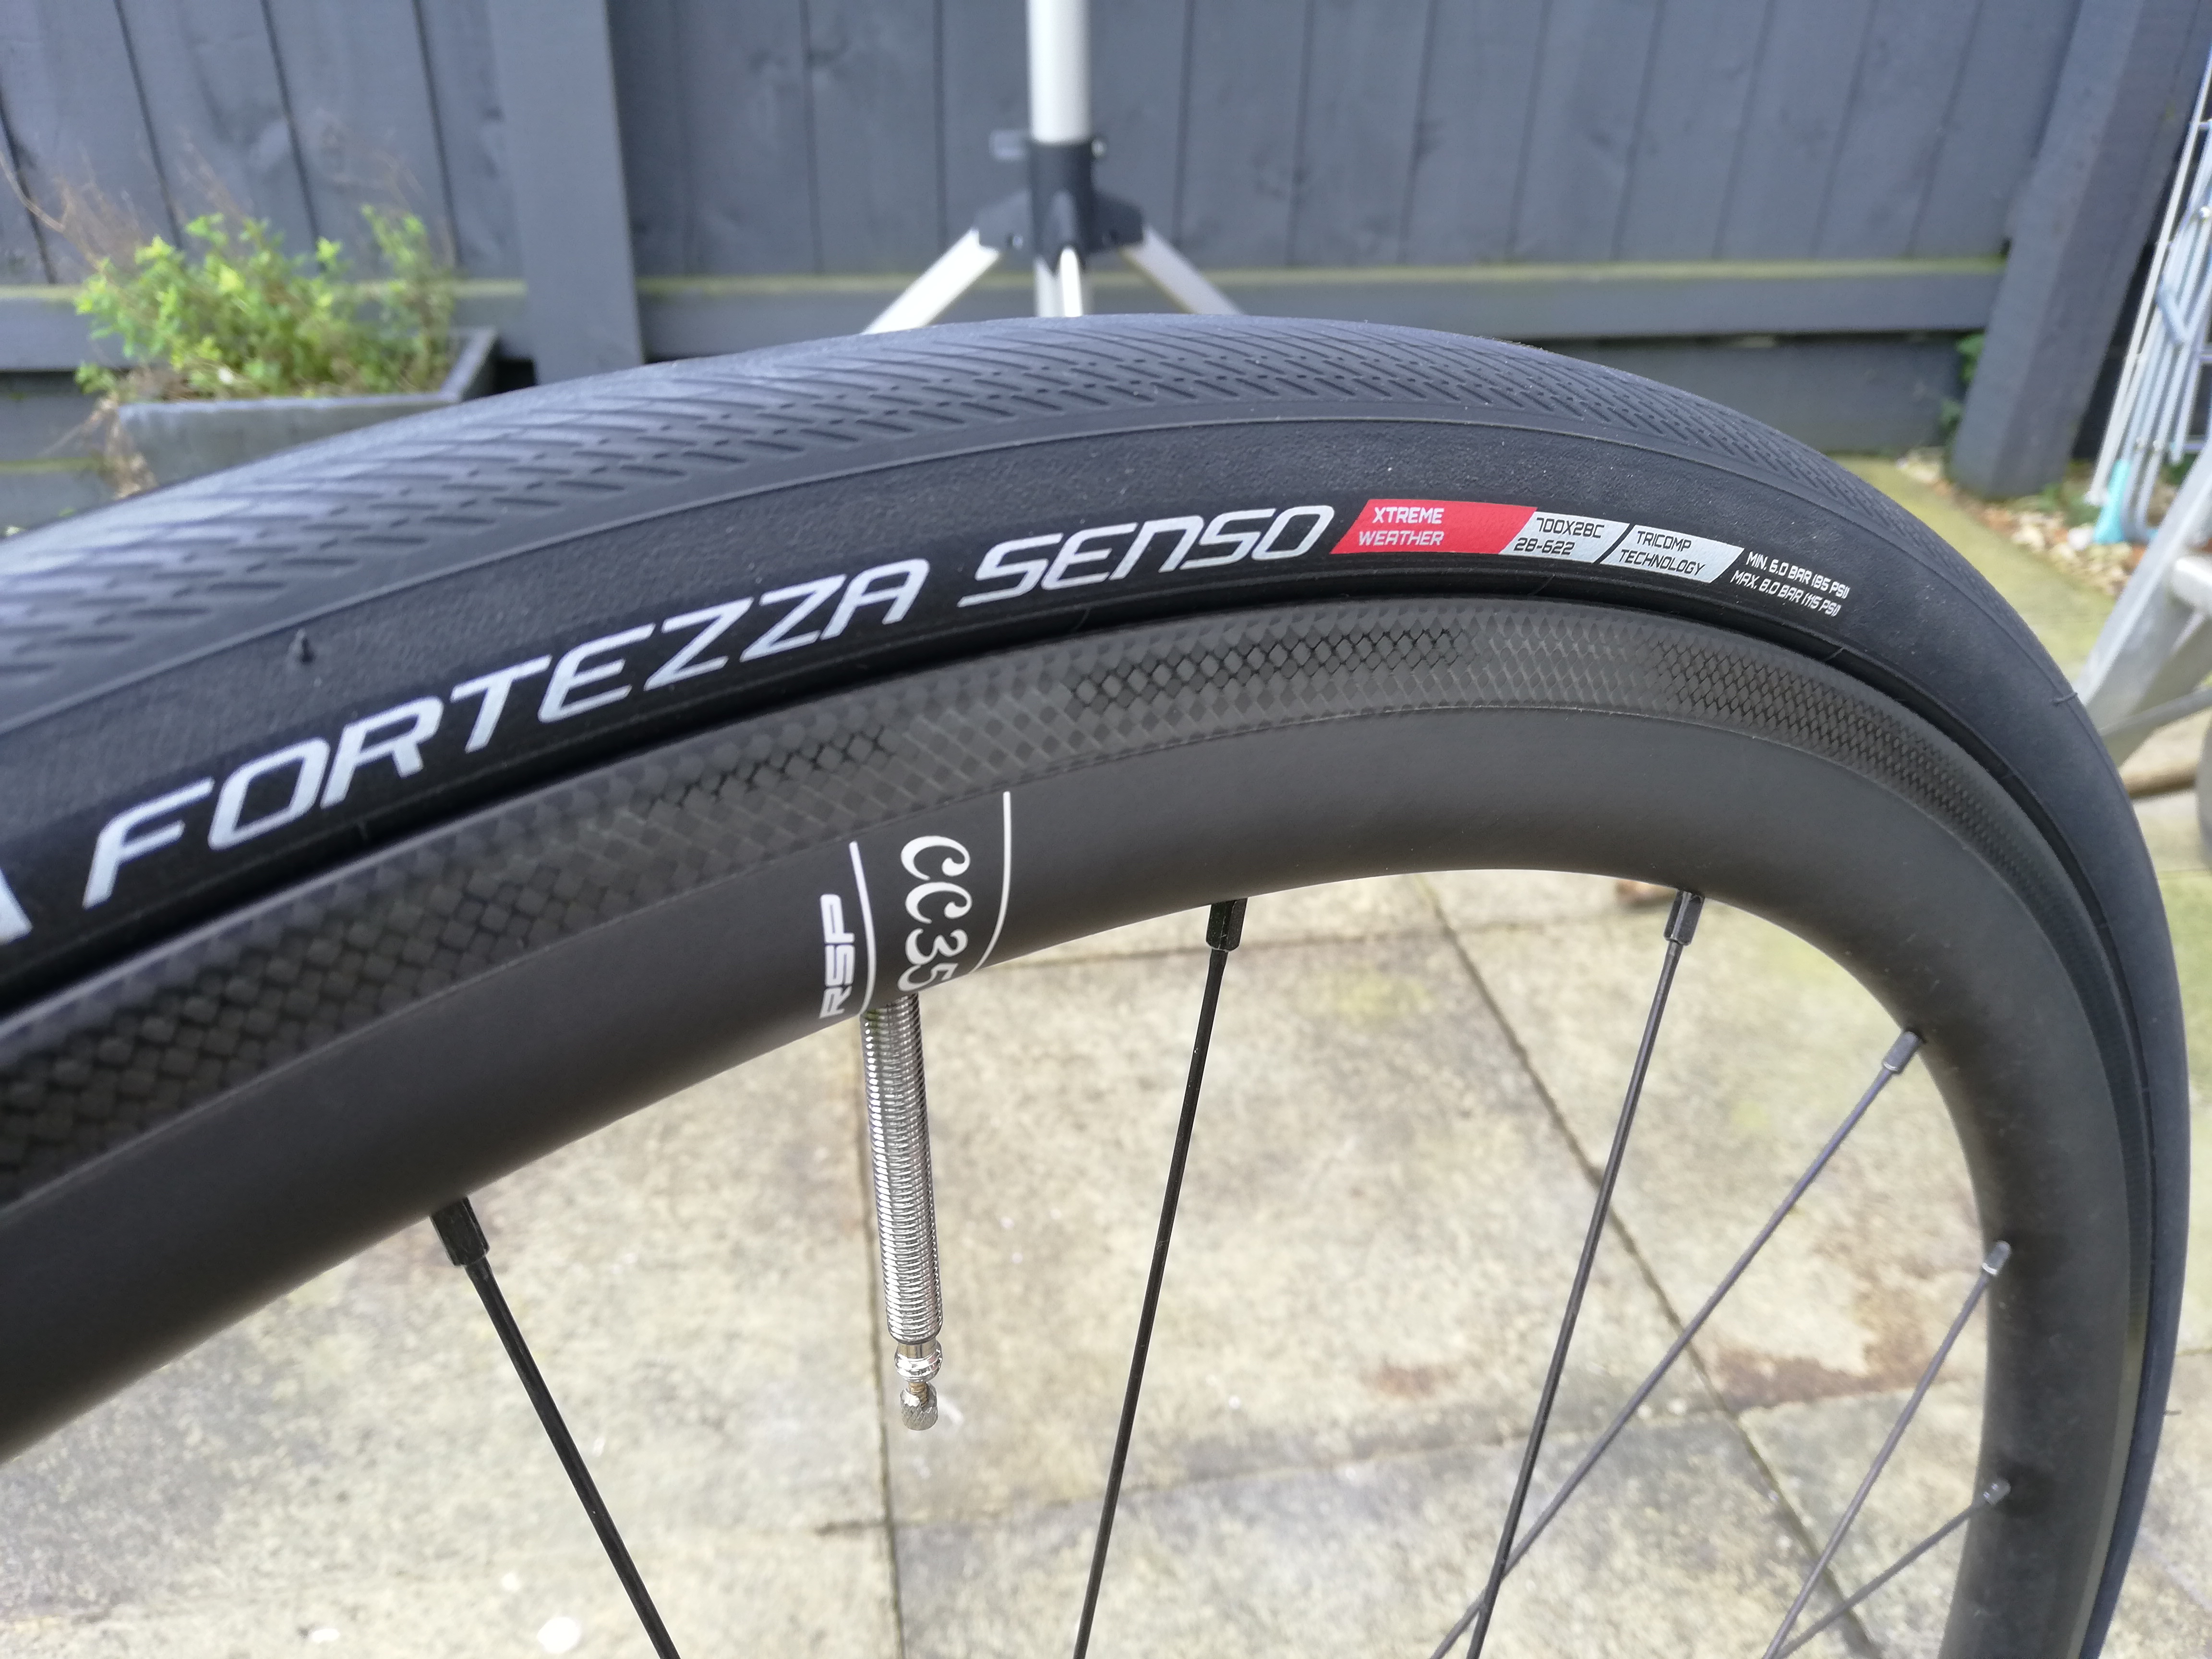 vredestein bicycle tyres